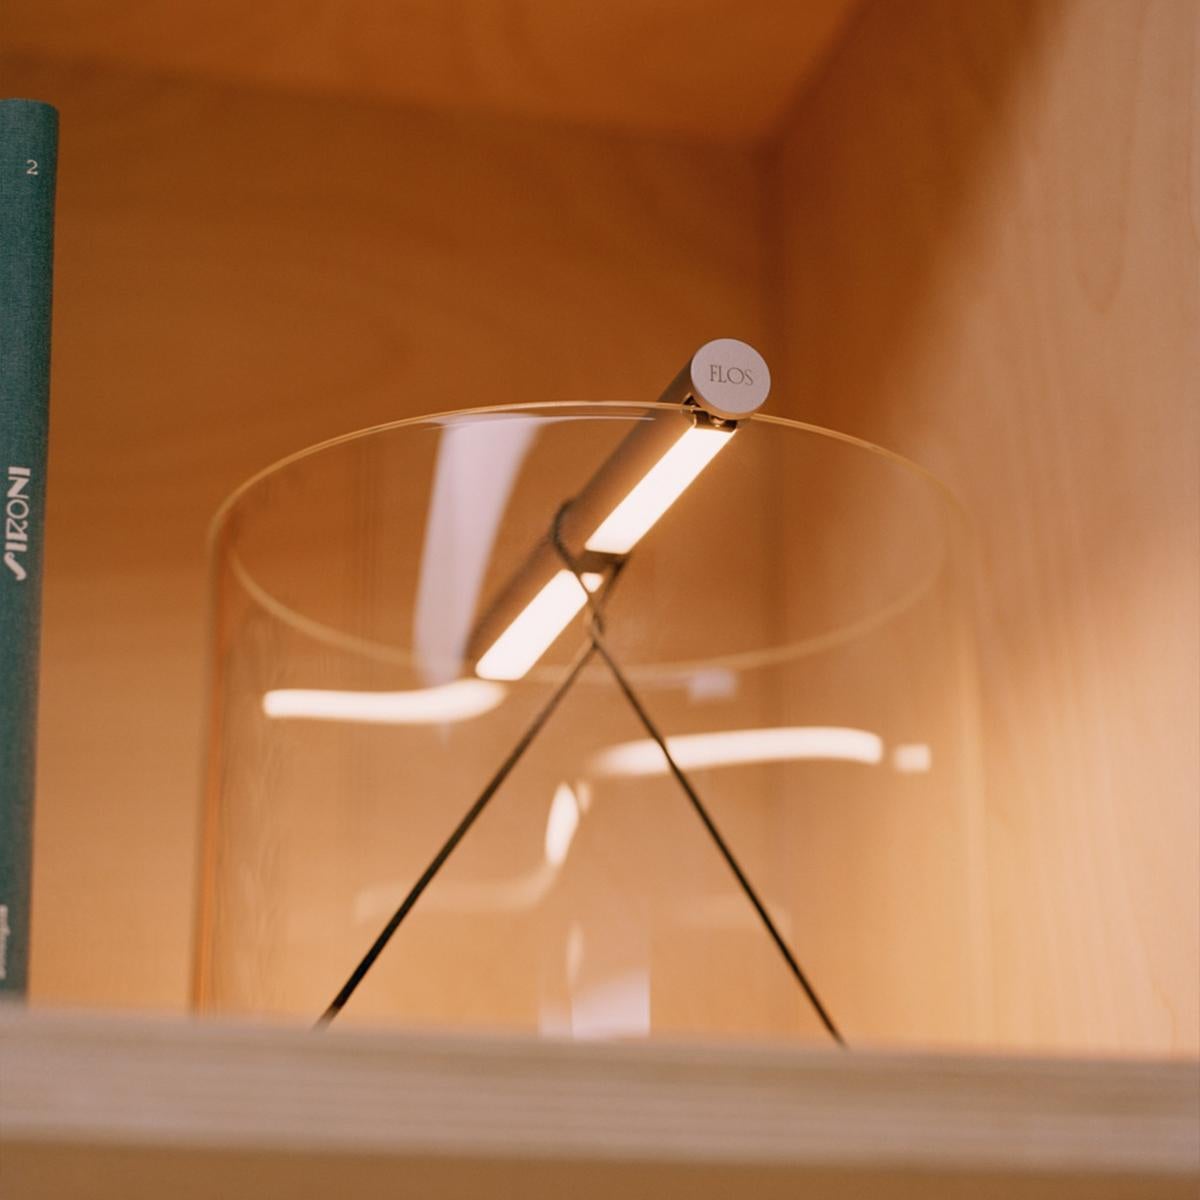 Glass Flos To-Tie T1 Table Lamp in Anodized Natural by Guglielmo Poletti